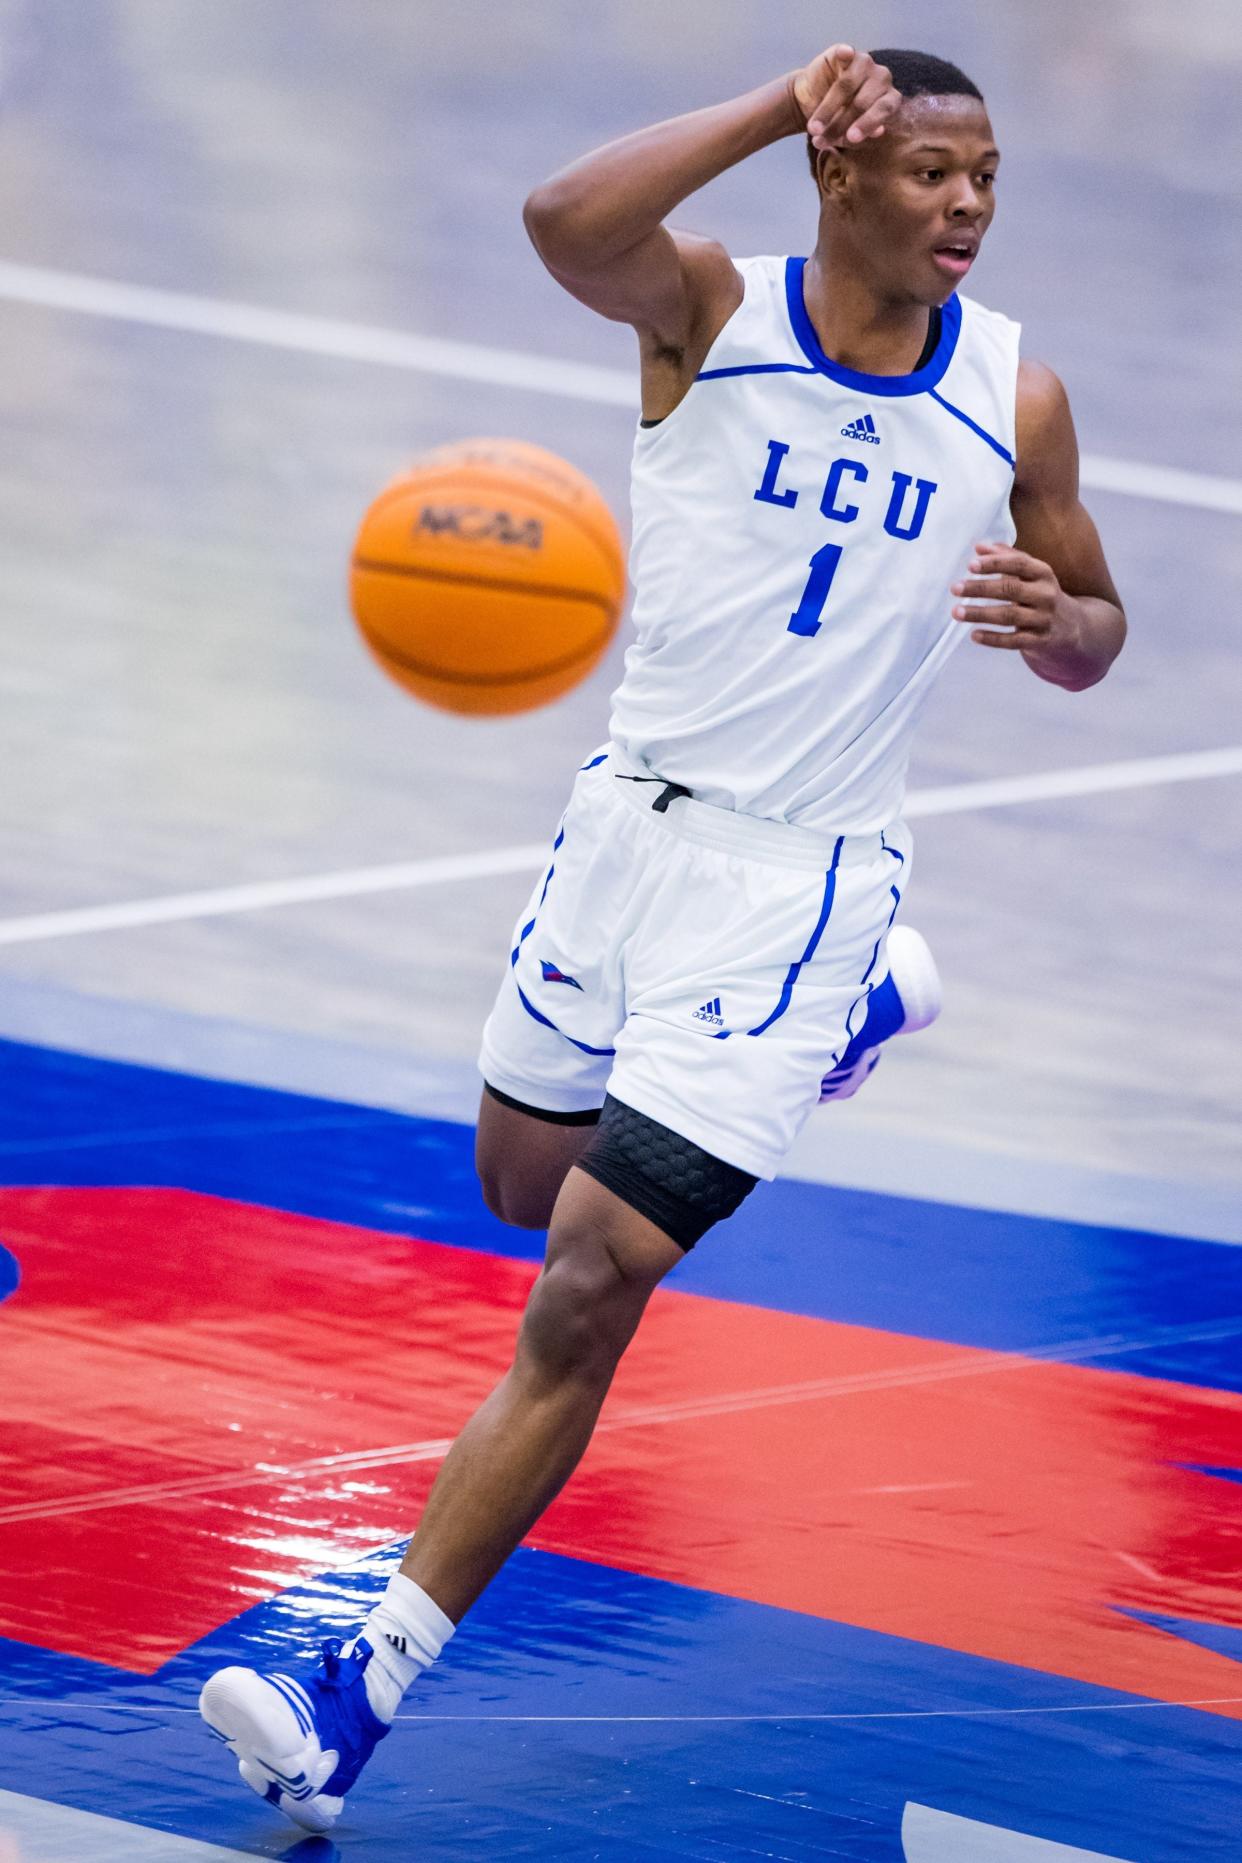 Lubbock Christian University guard Najeeb Muhammad (1) passes the ball during Thursday's game against St. Edward's at the Rip Griffin Center. LCU won 82-57.